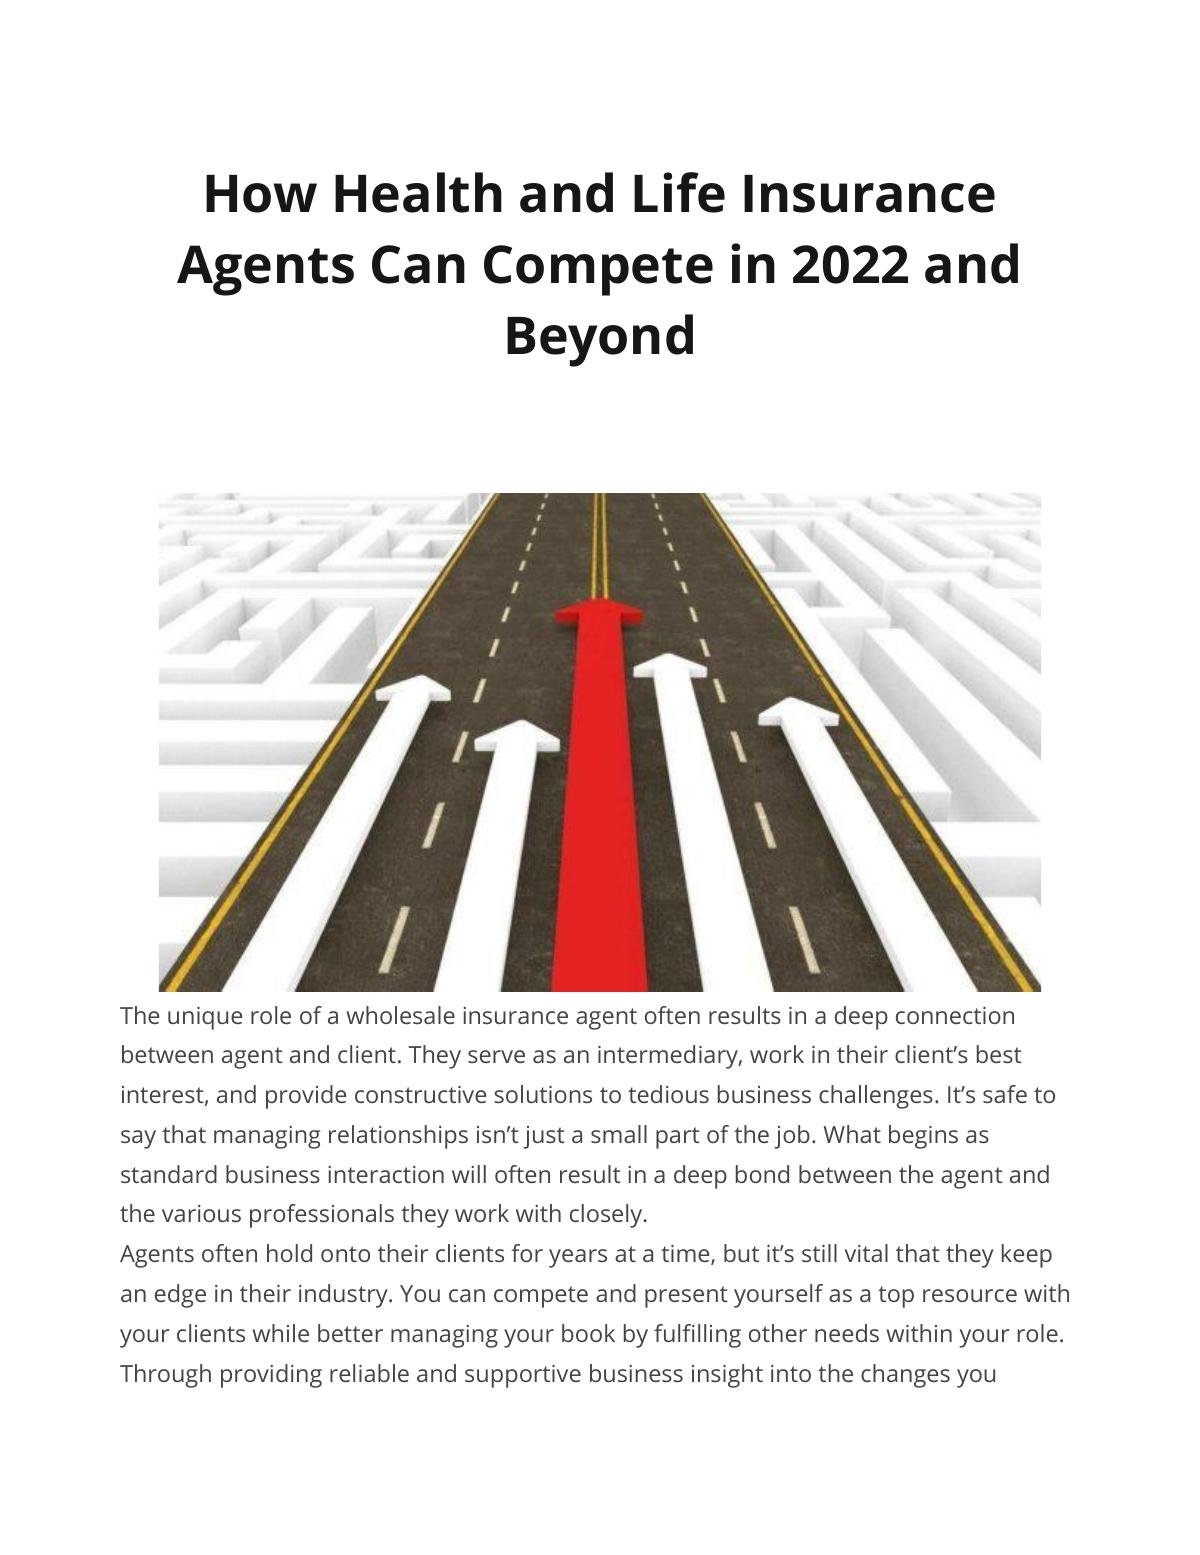 How Health and Life Insurance Agents Can Compete in 2022 and Beyond   